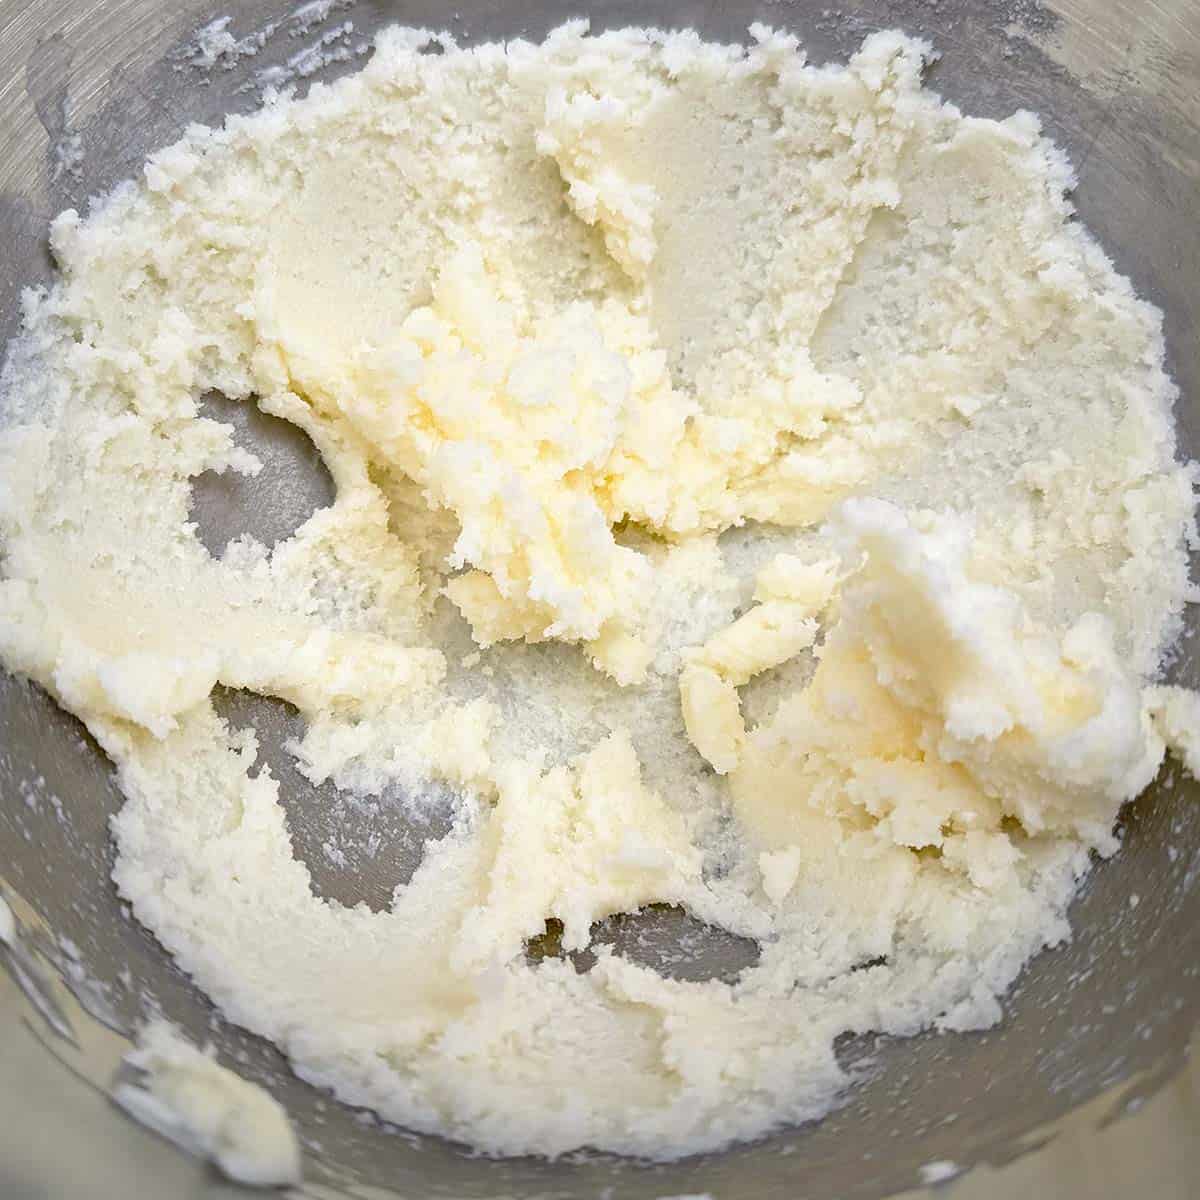 In a mixer bowl with the creamed butter and sugar have been mixed.